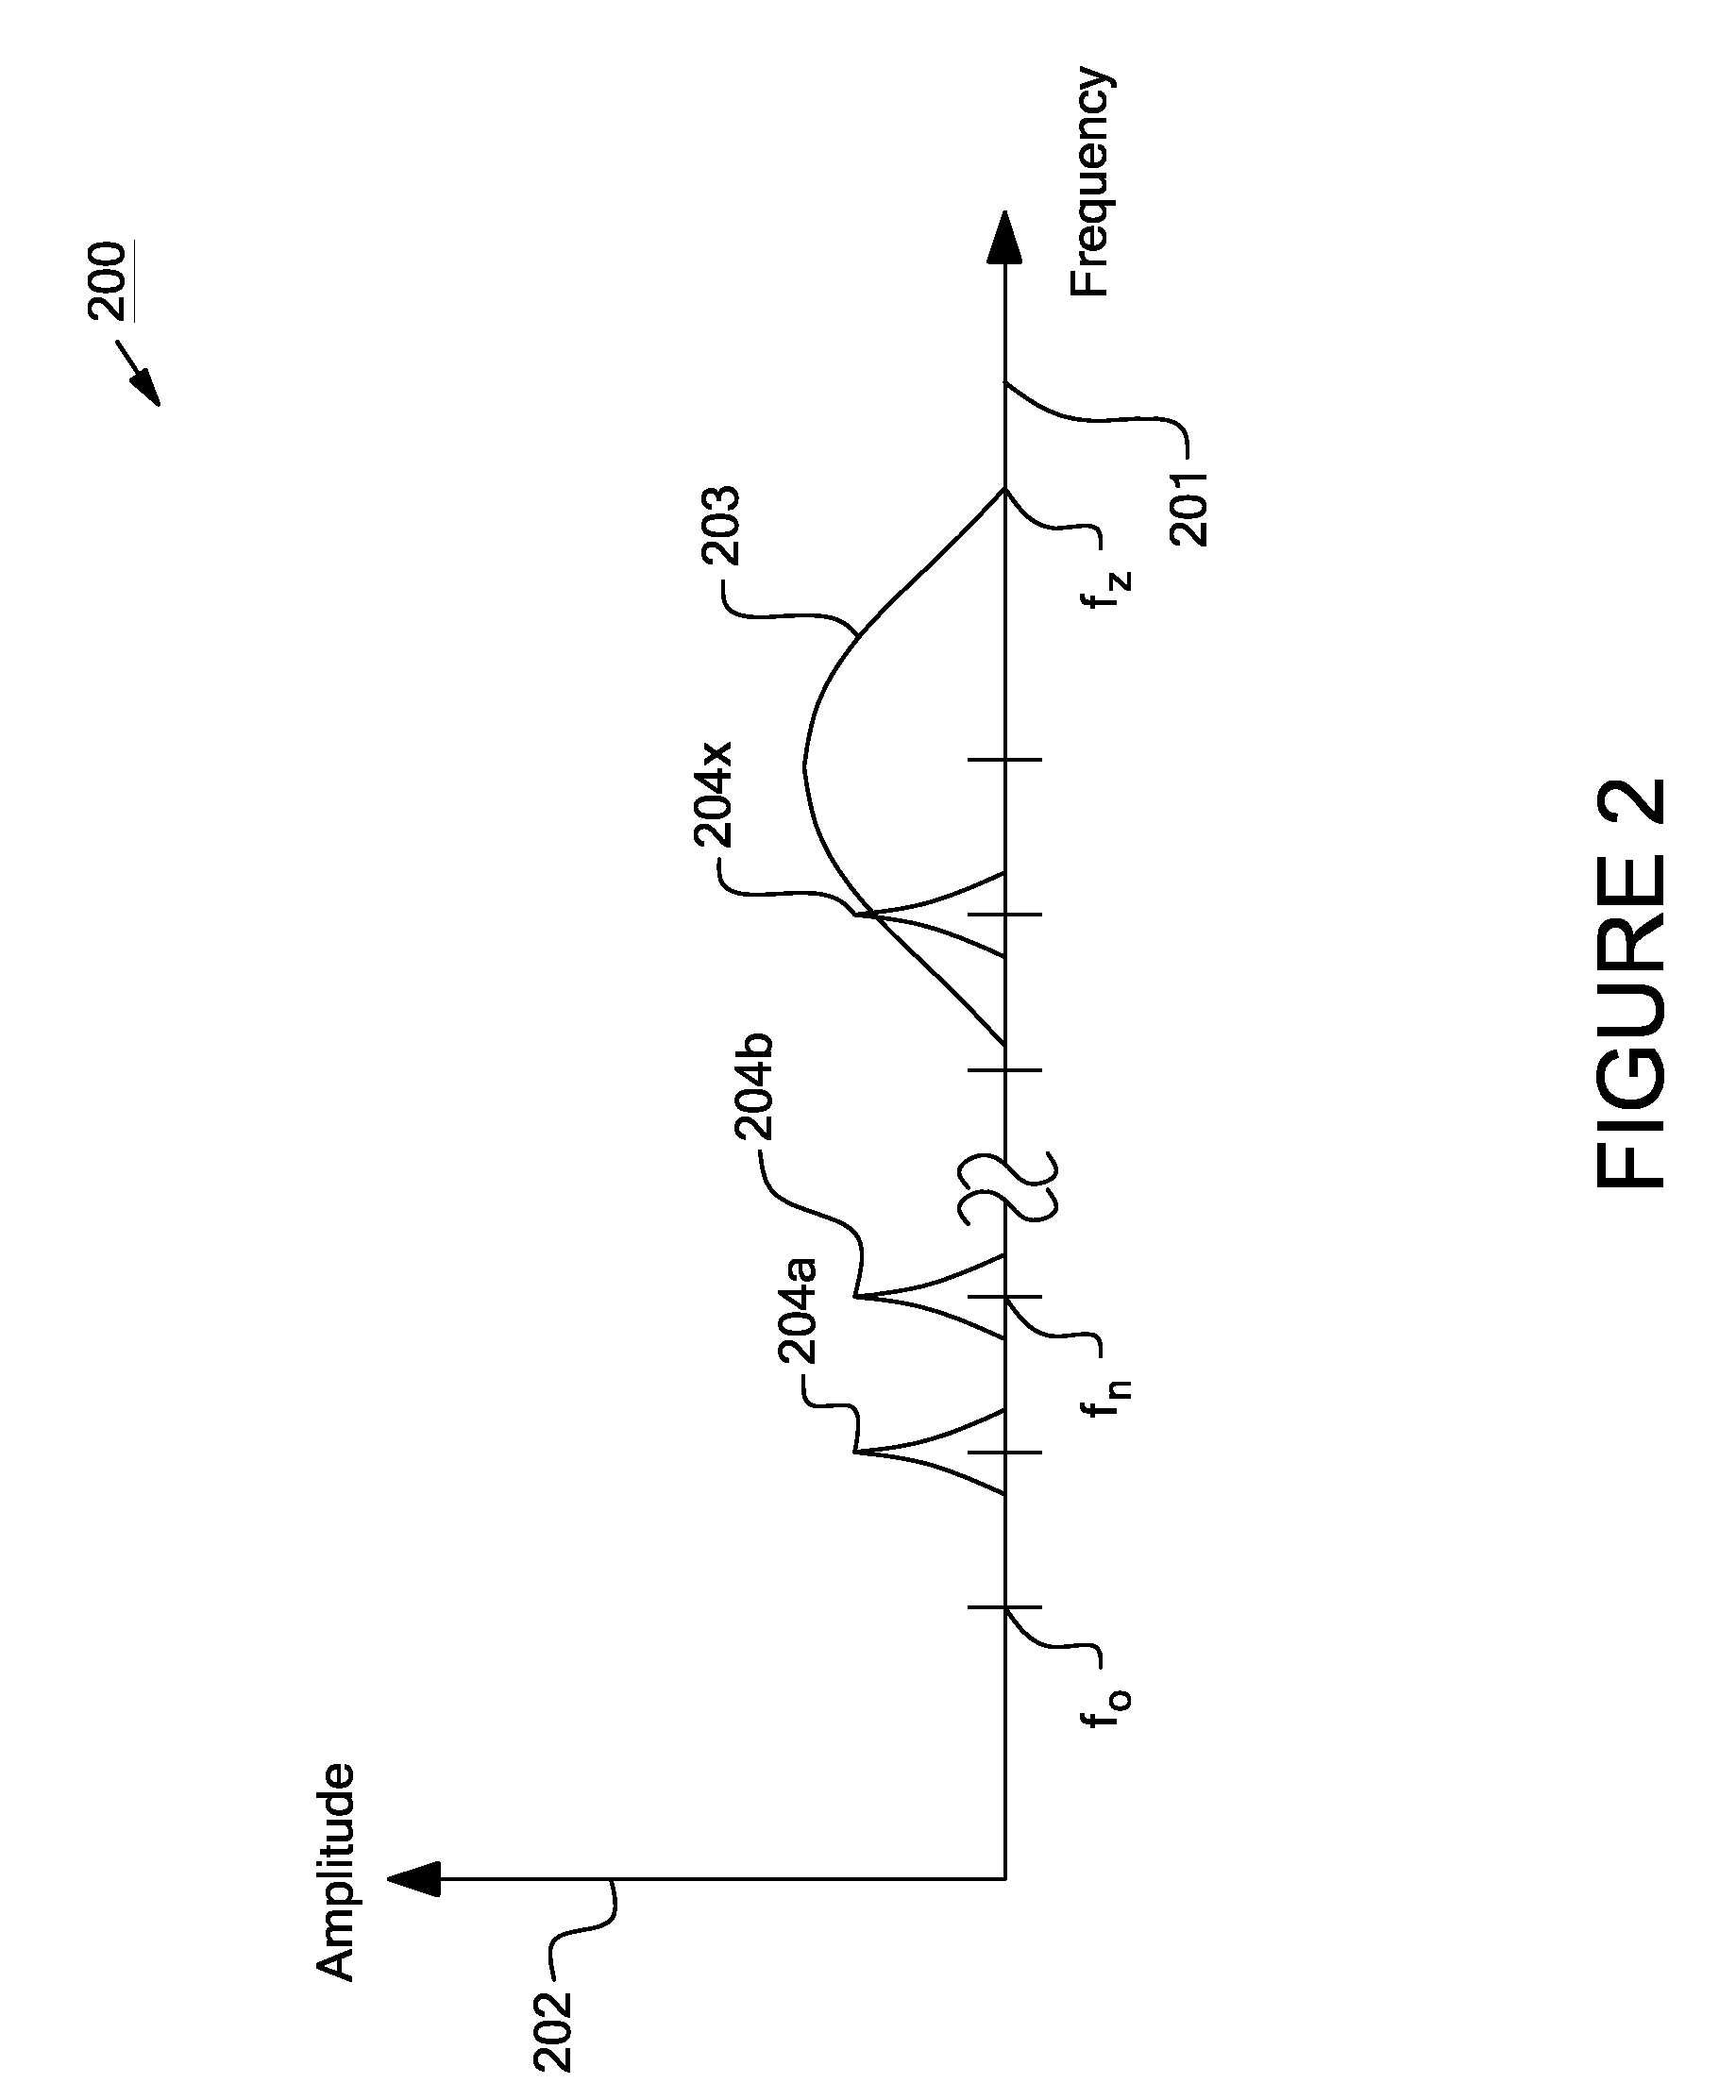 Enhanced System and Method for Theft Prevention in a Solar Power Array During Nonoperative Periods